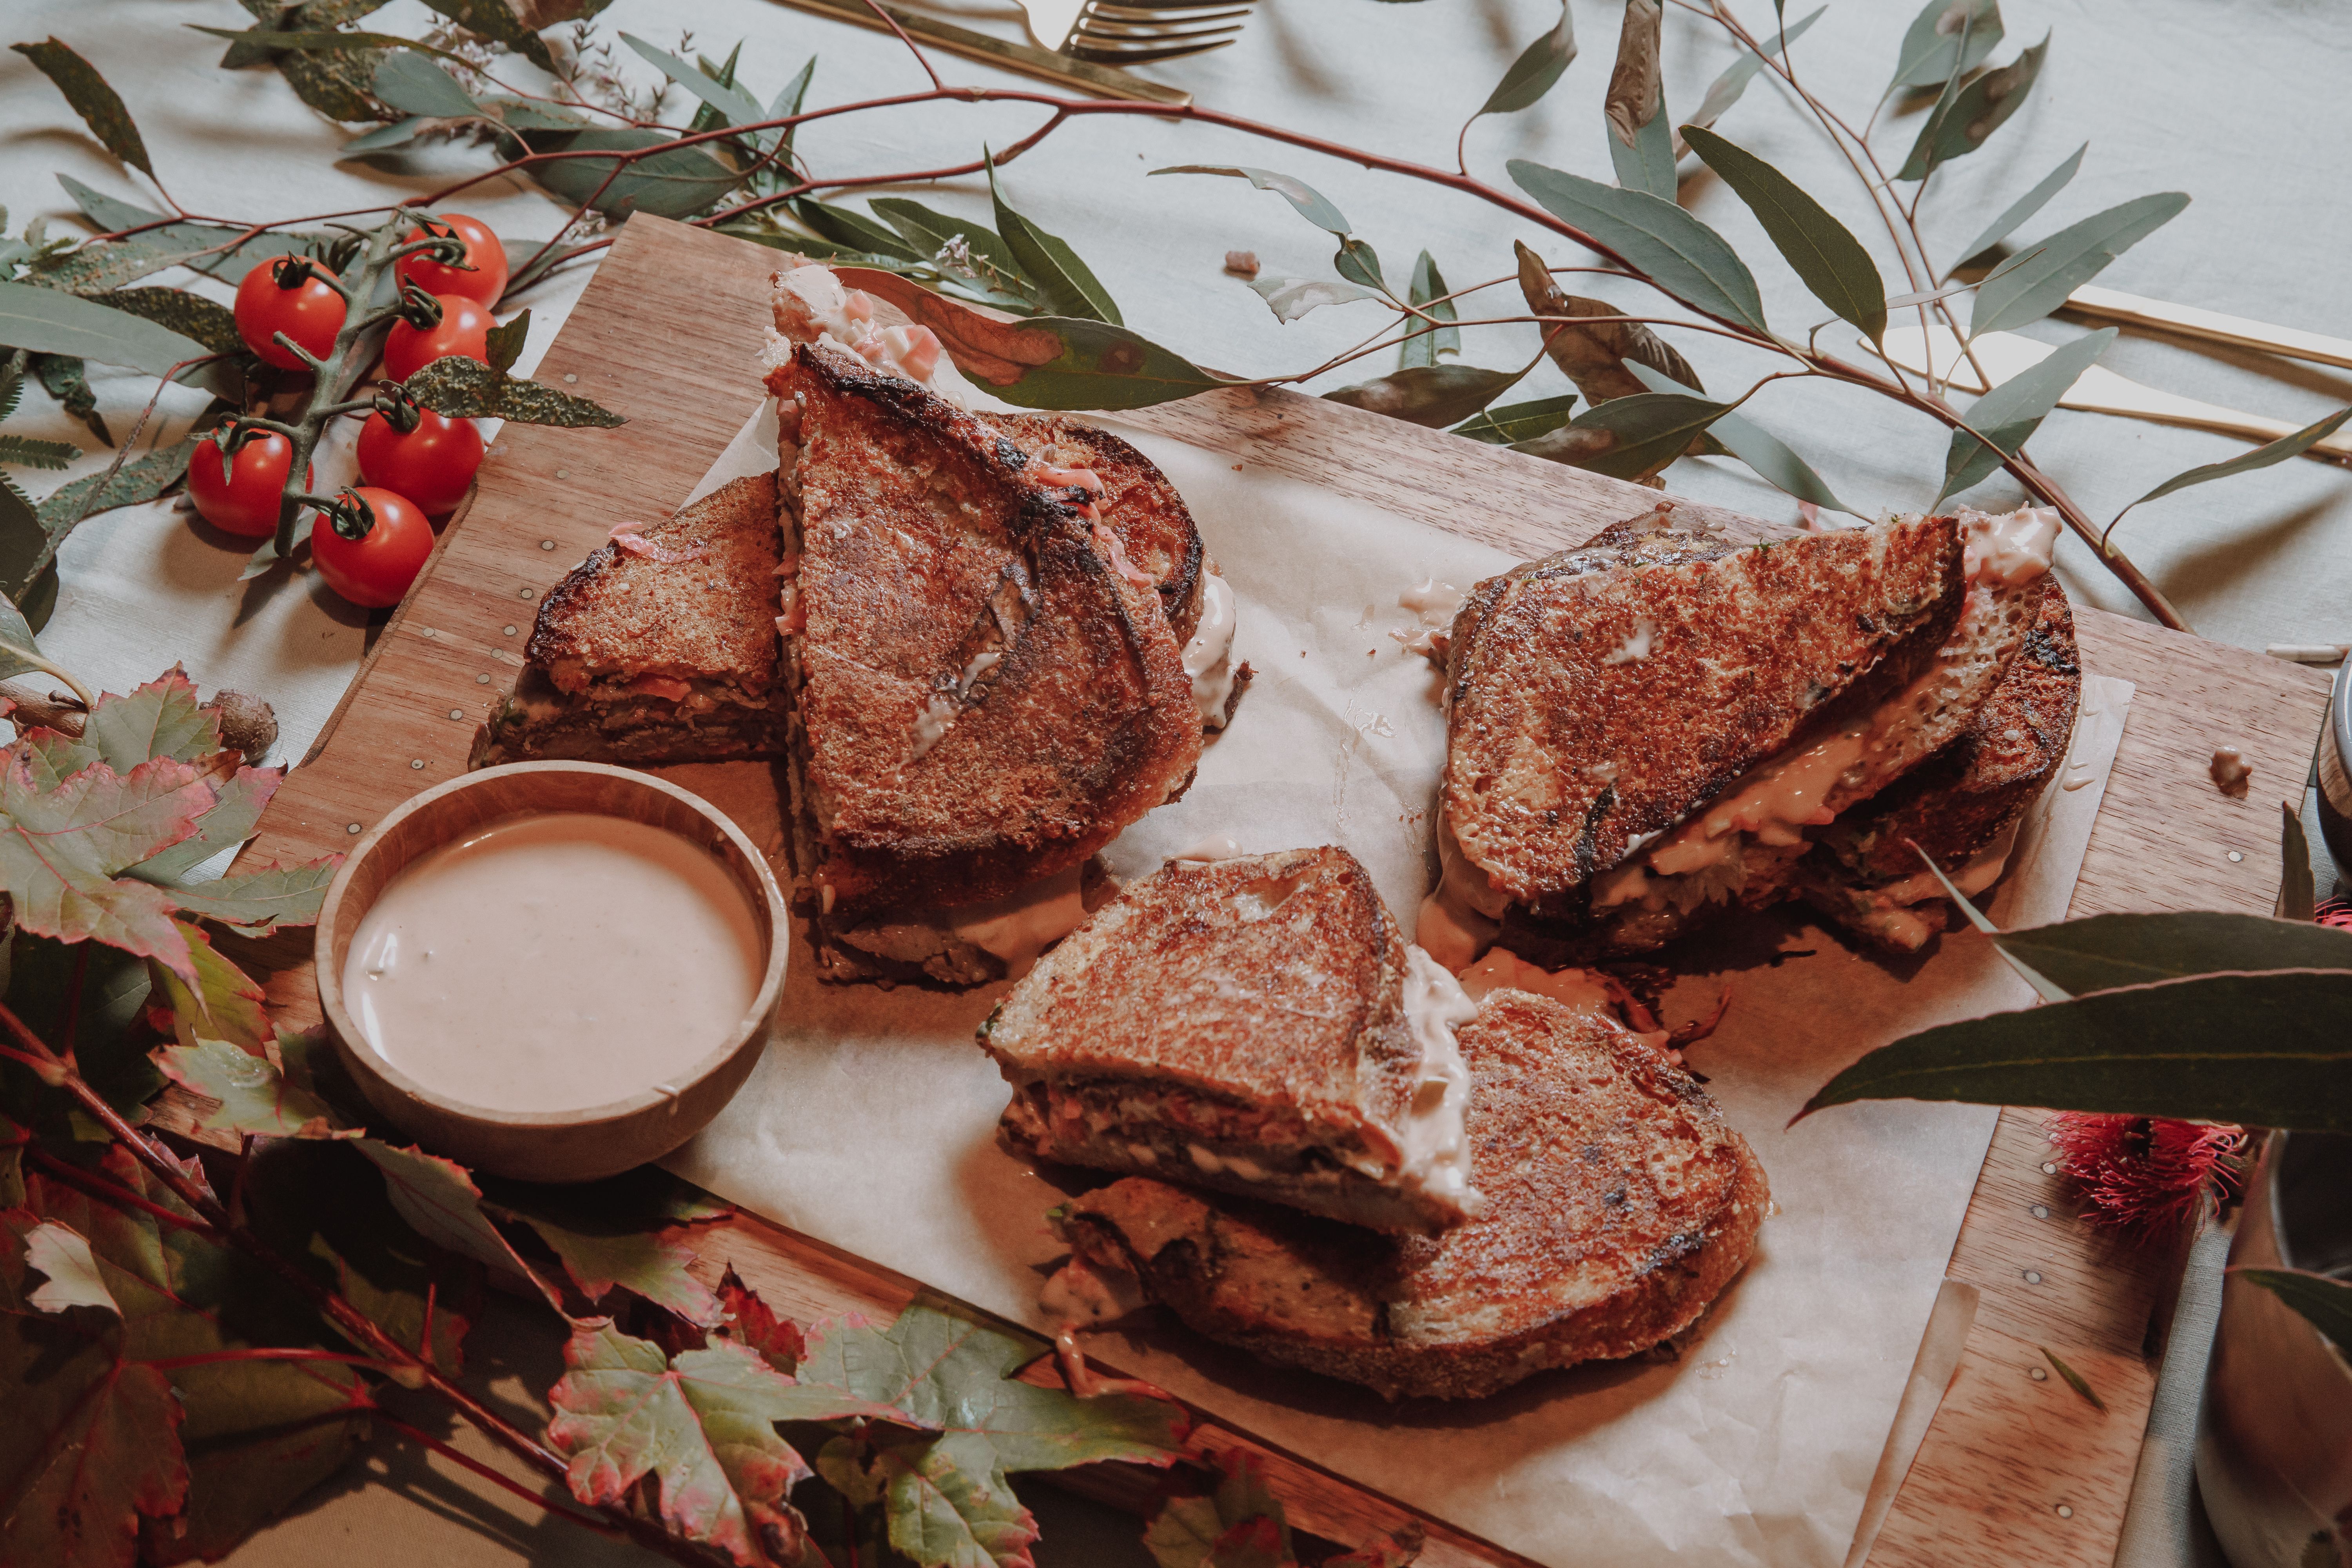 venison toasted sandwiches with dipping sauce